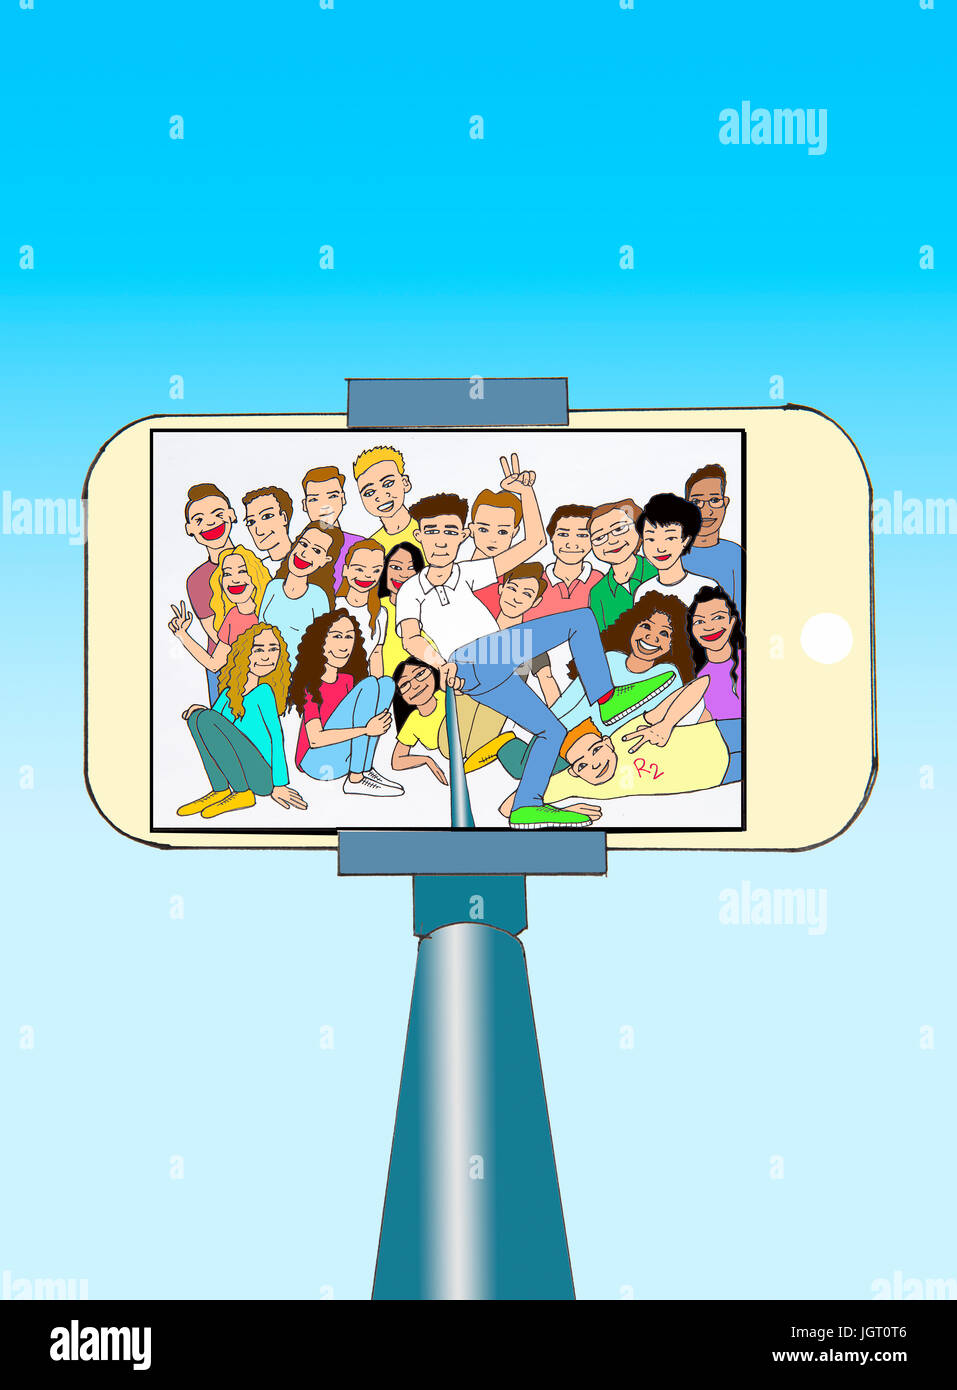 Group of young people taking a selfie. Illustration. Stock Photo